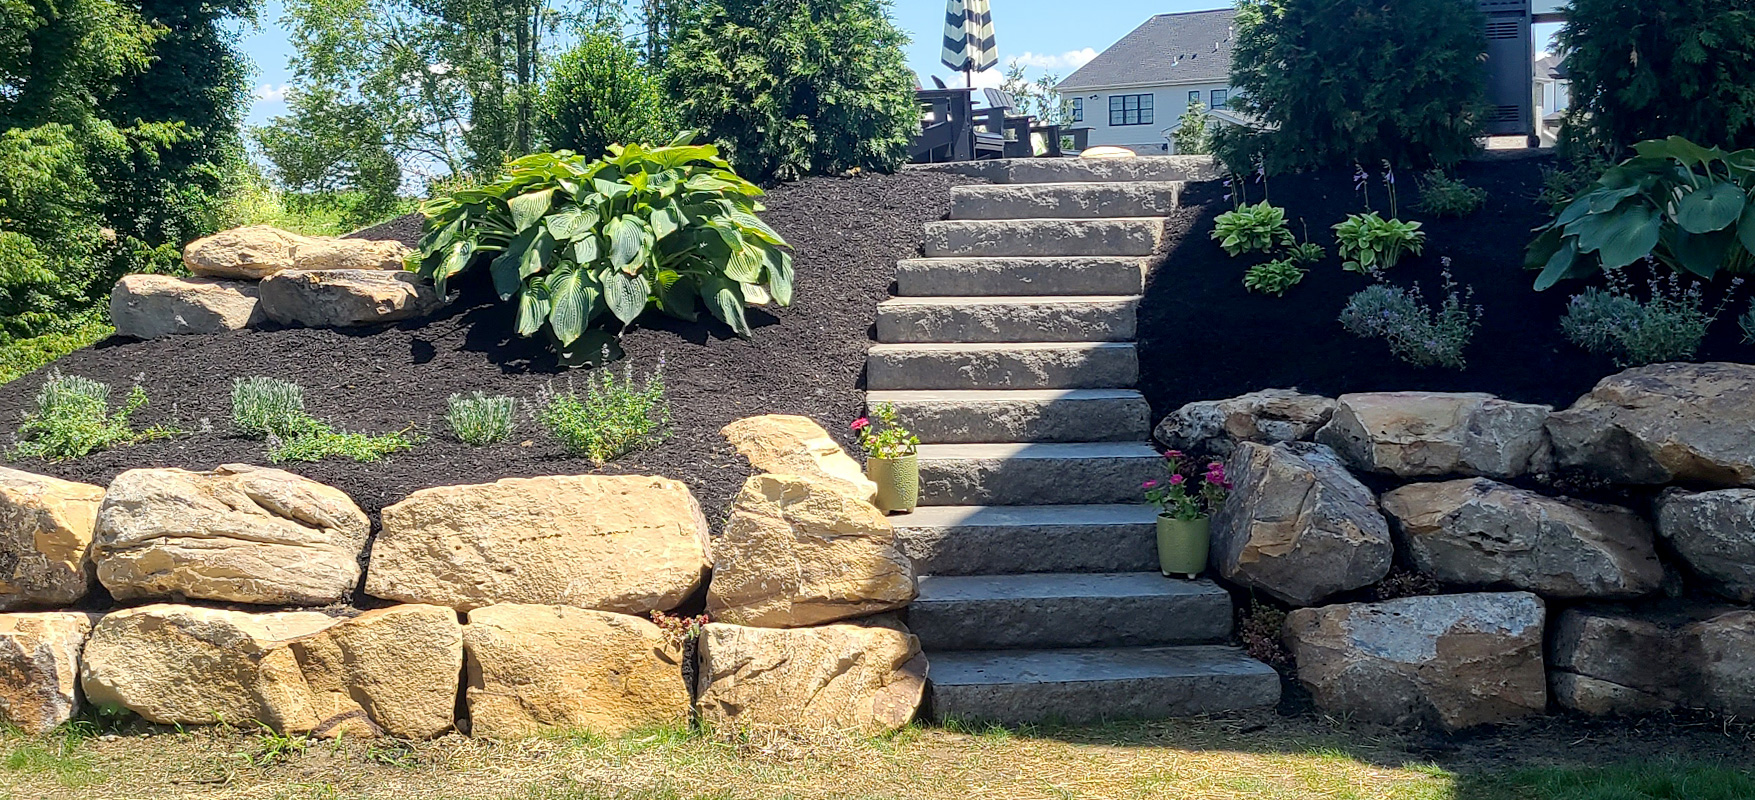 McGinn Landscaping - Hardscaping Boulder Wall and Concrete Stairs